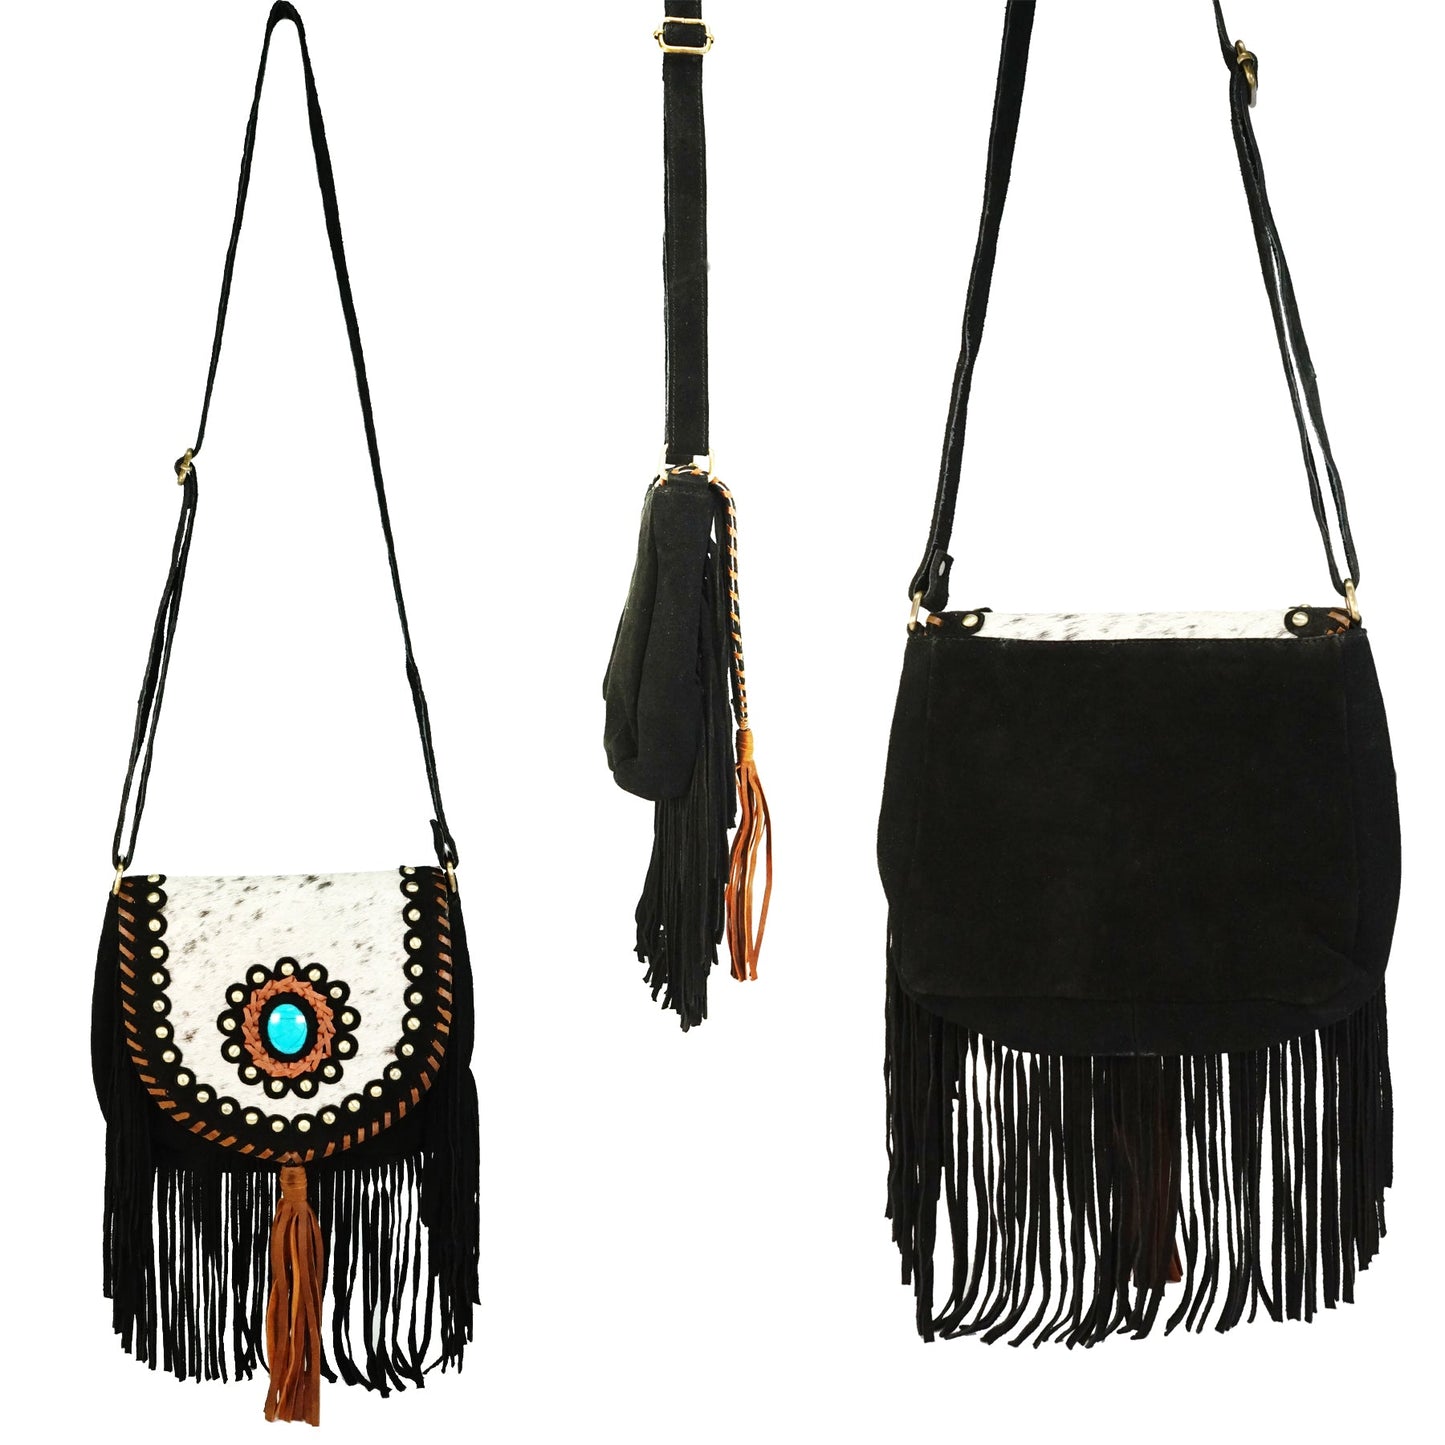 Aztec-Inspired Cowhide Purse with Boho Fringe - Rodeo Cowhide RugsBrown